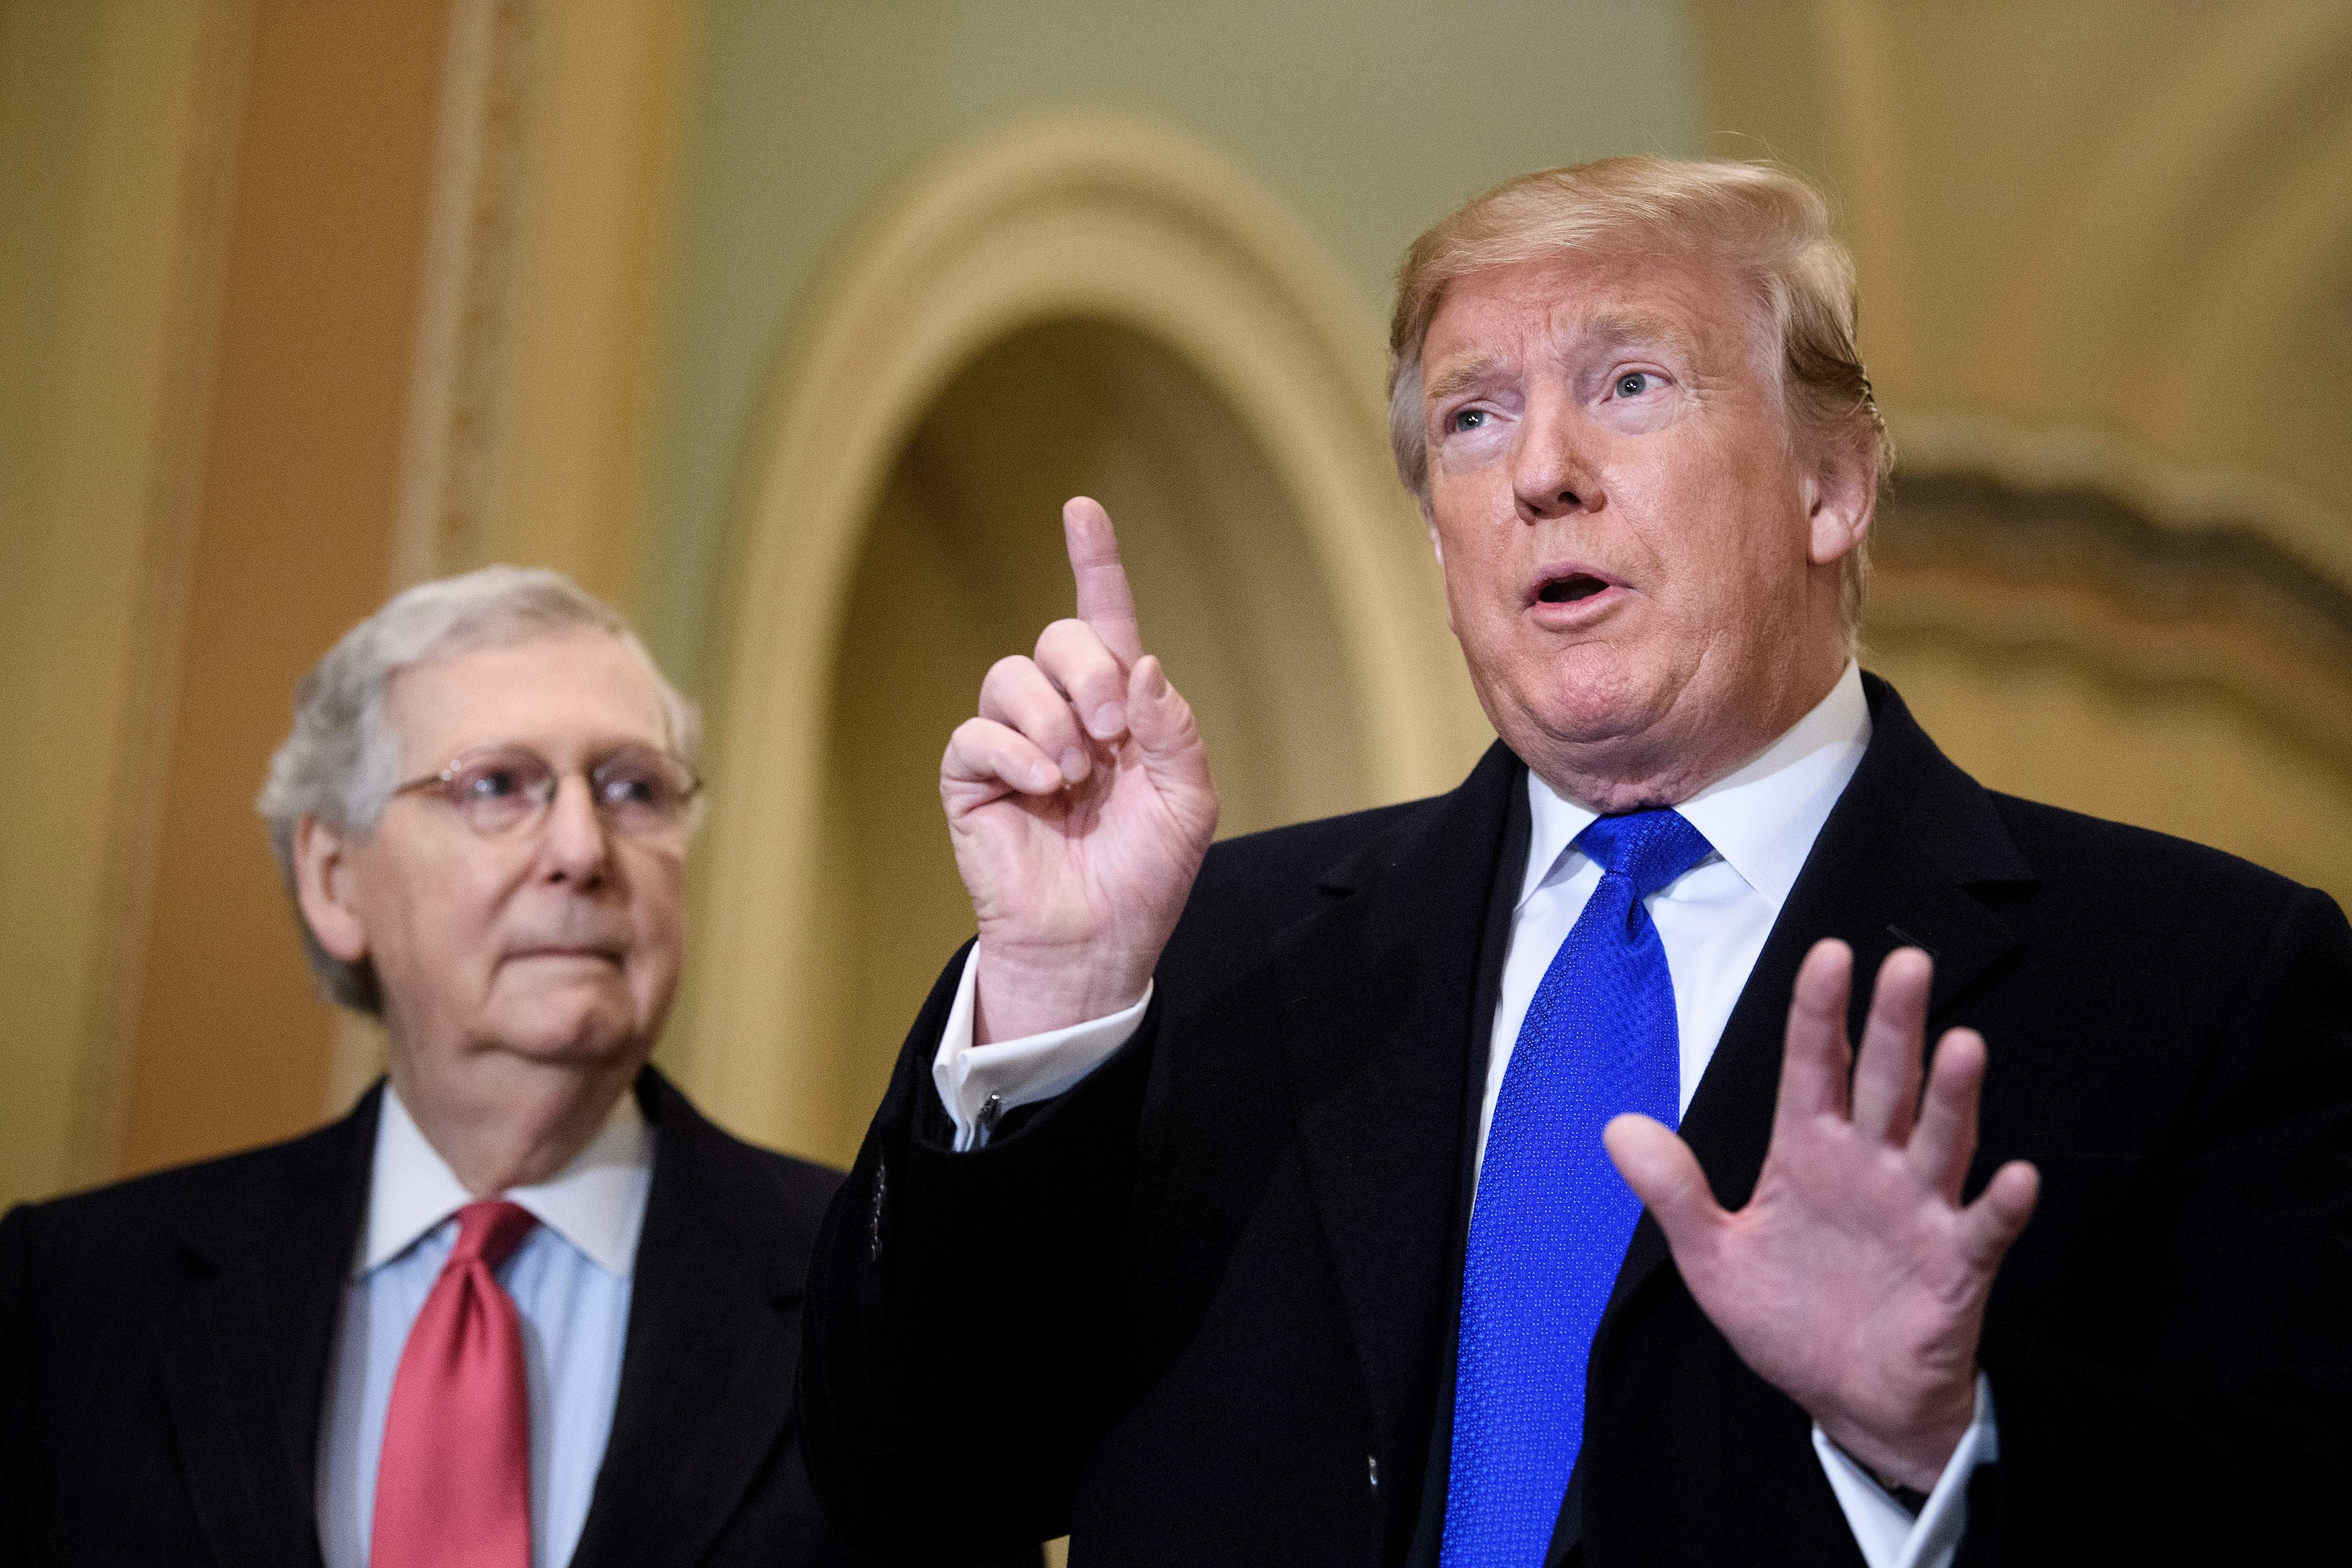 Senate Majority Leader Senator Mitch McConnell listens while US President Donald Trump speaks to reporters before a meeting with Senate Republicans on Capitol Hill March 26, 2019, in Washington, DC. (BRENDAN SMIALOWSKI/AFP/Getty Images)